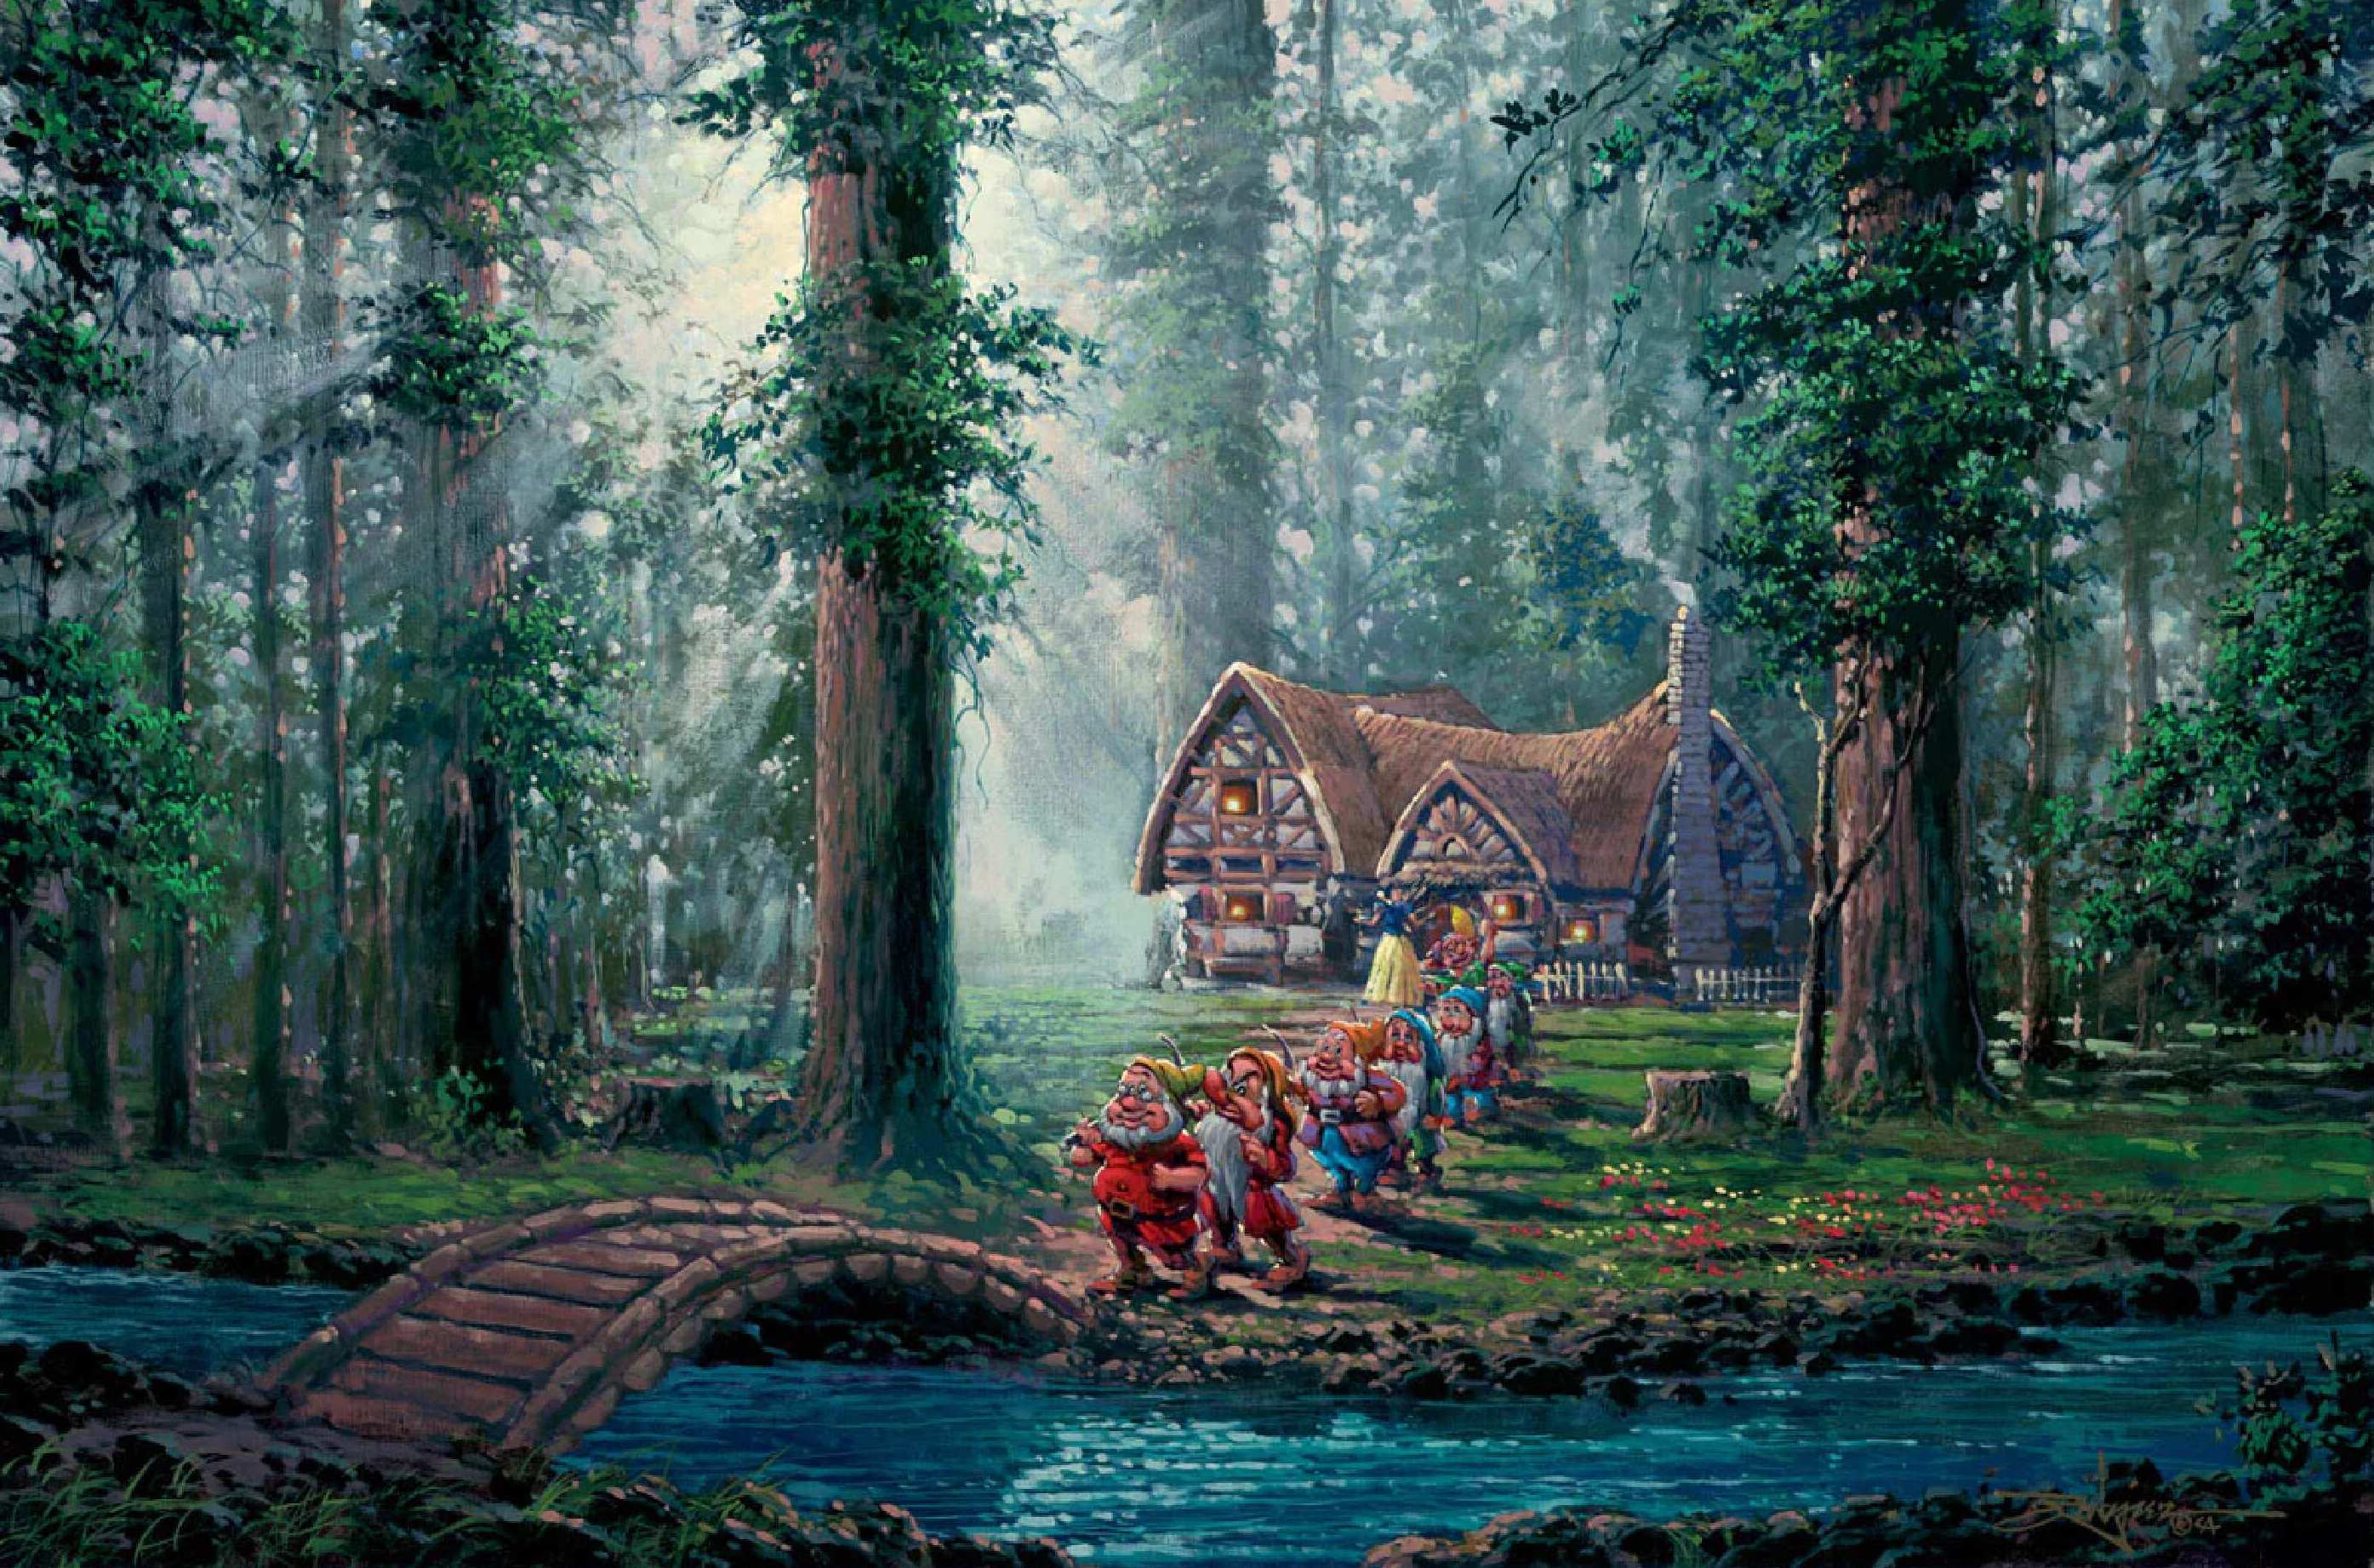 Join Snow White and the lovable Seven Dwarfs as they take a leisurely morning walk through the enchanted forest.